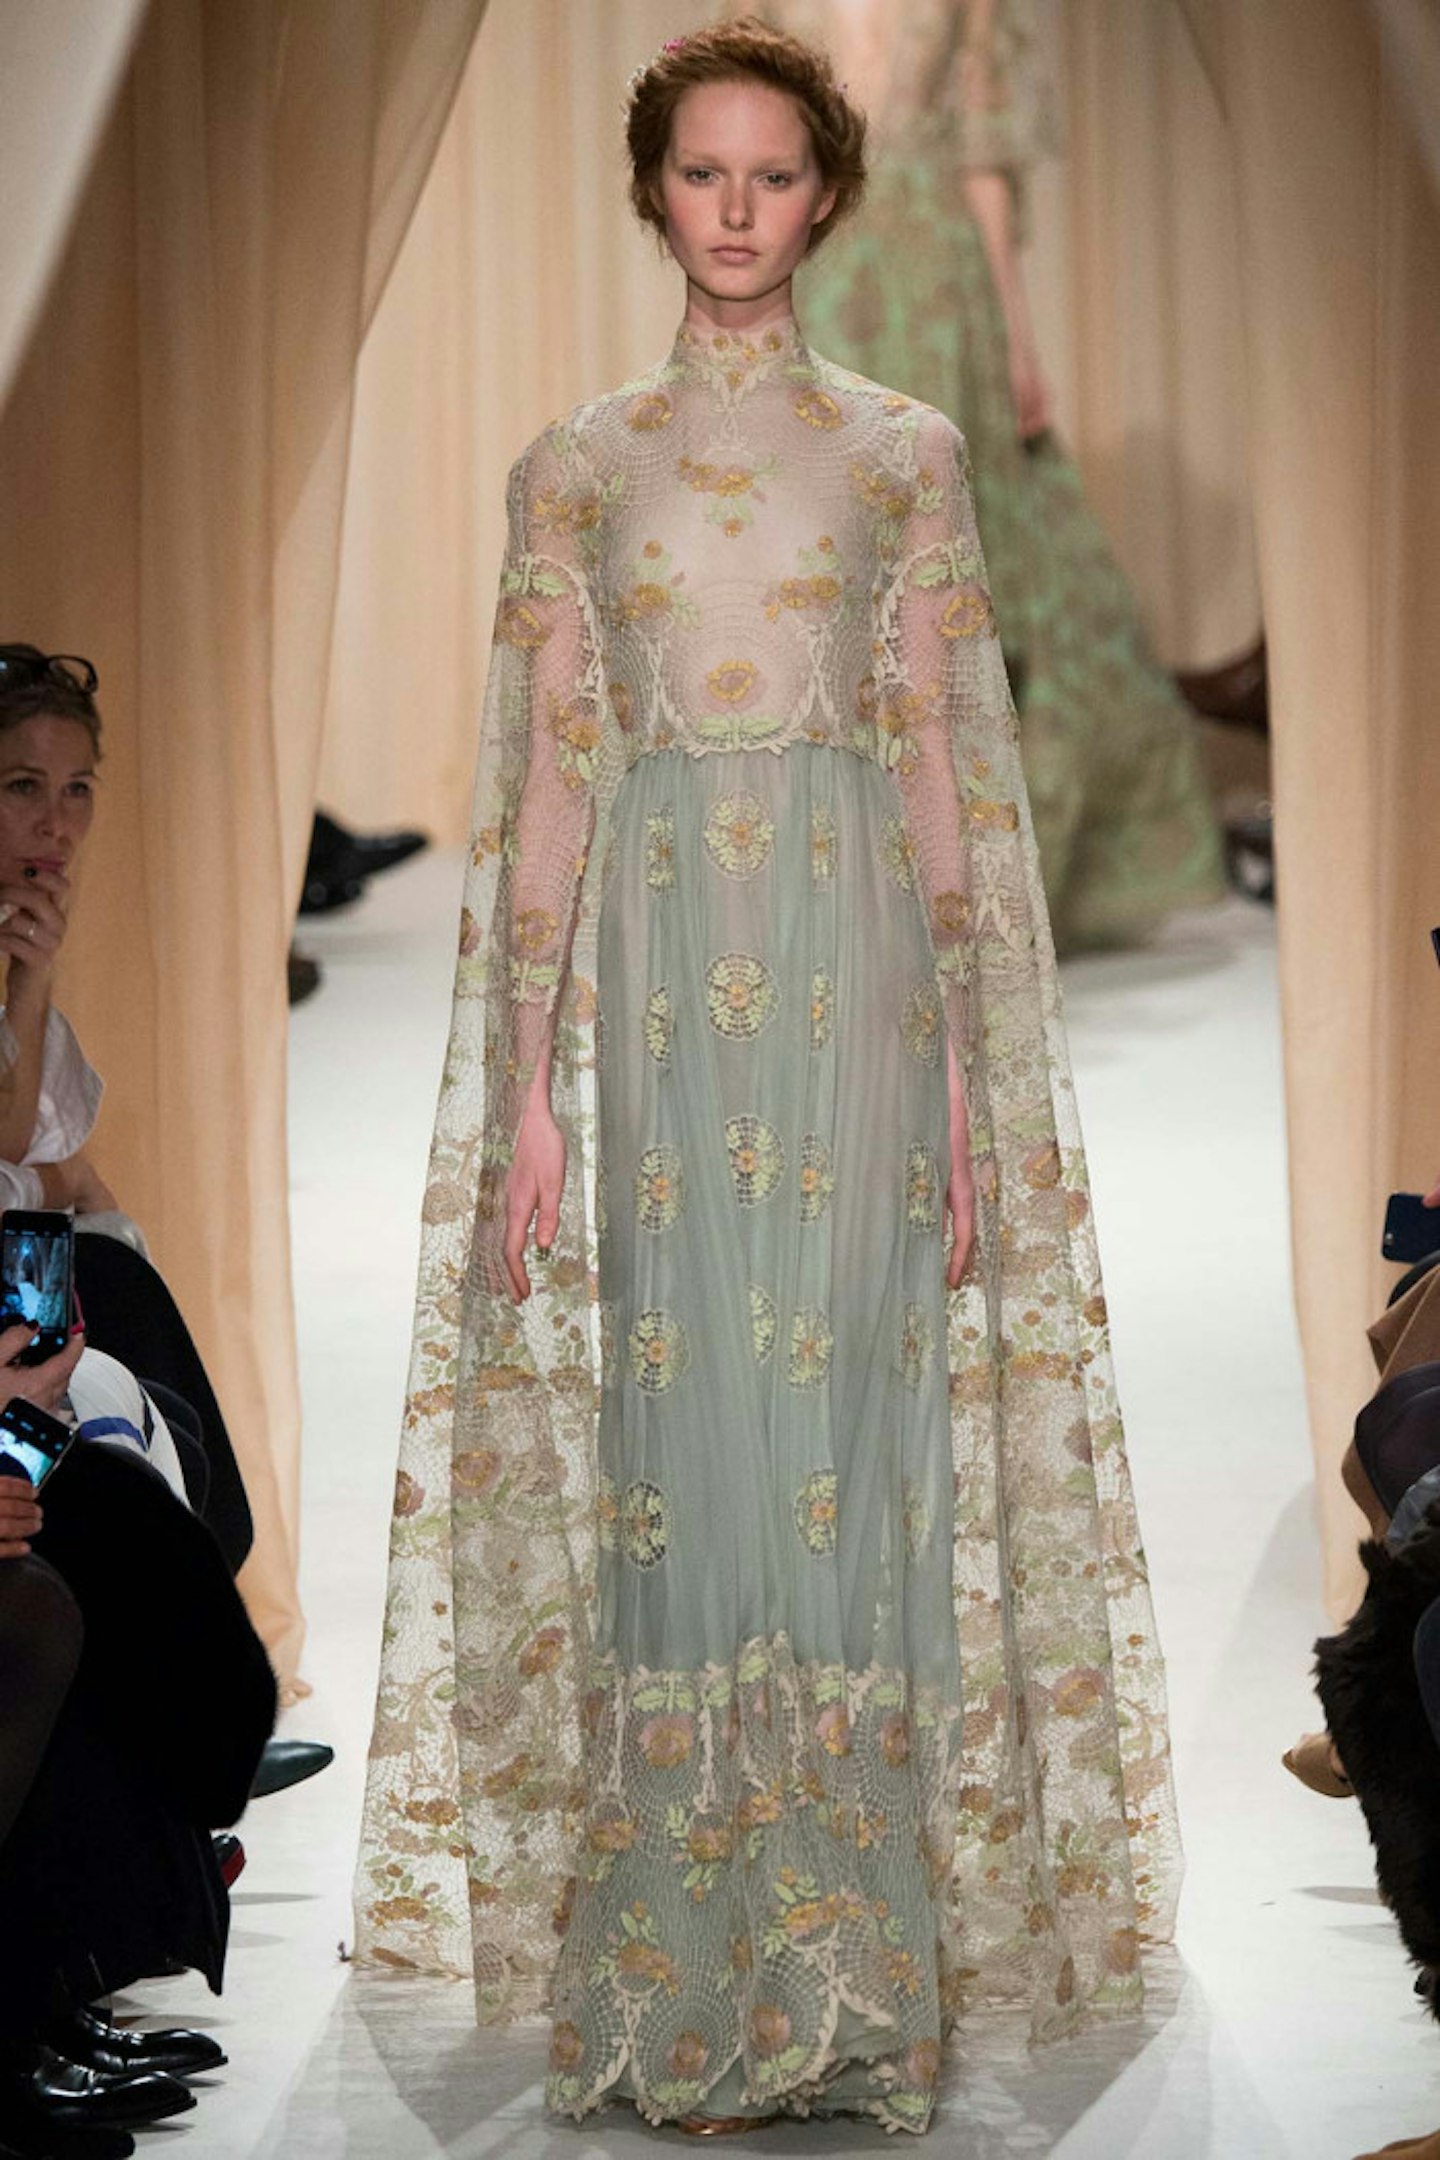 Will Sienna be crowned the Queen of boho in this Valentino?